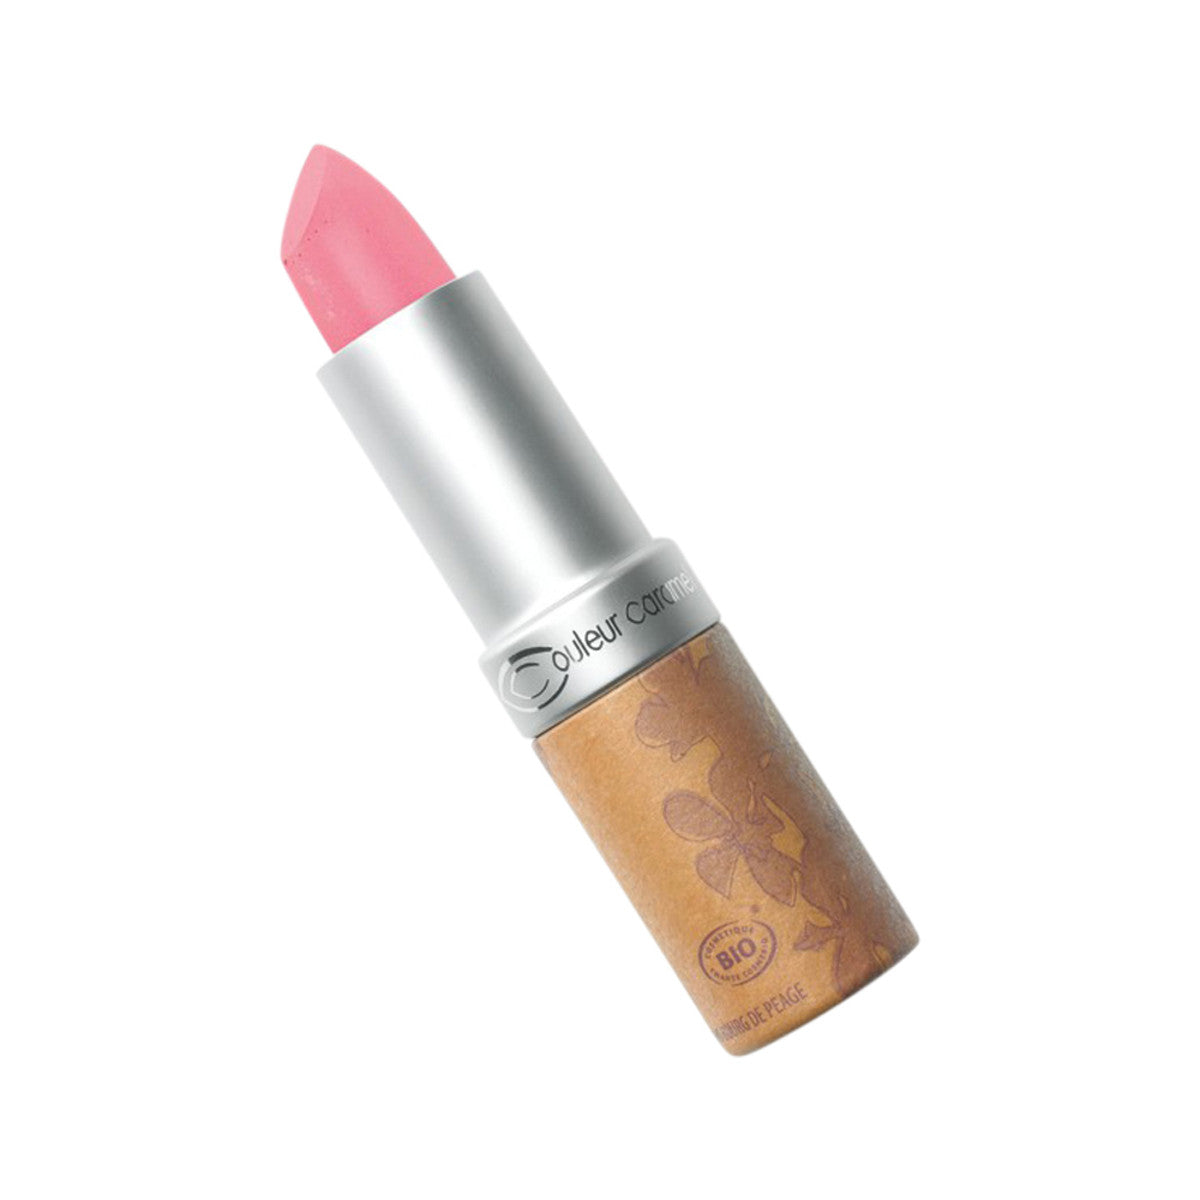 Couleur Caramel - Lipstick Glossy Pearly Medium Pink (221)